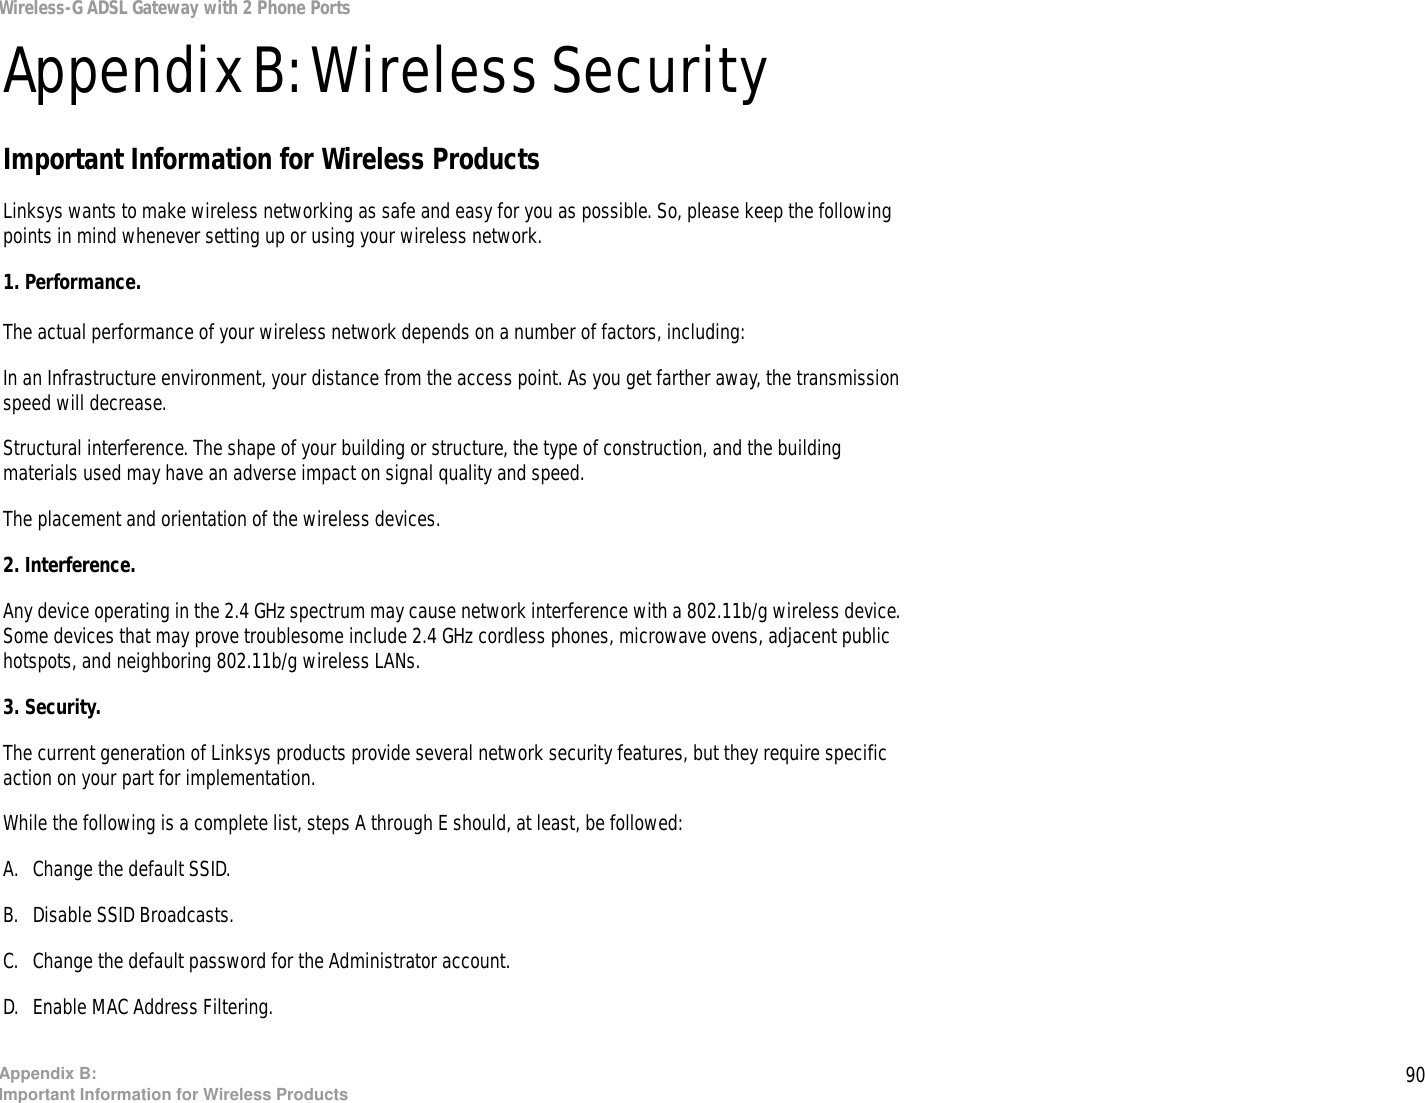 90Appendix B: Important Information for Wireless ProductsWireless-G ADSL Gateway with 2 Phone PortsAppendix B: Wireless SecurityImportant Information for Wireless ProductsLinksys wants to make wireless networking as safe and easy for you as possible. So, please keep the following points in mind whenever setting up or using your wireless network.1. Performance. The actual performance of your wireless network depends on a number of factors, including:In an Infrastructure environment, your distance from the access point. As you get farther away, the transmission speed will decrease. Structural interference. The shape of your building or structure, the type of construction, and the building materials used may have an adverse impact on signal quality and speed. The placement and orientation of the wireless devices. 2. Interference. Any device operating in the 2.4 GHz spectrum may cause network interference with a 802.11b/g wireless device. Some devices that may prove troublesome include 2.4 GHz cordless phones, microwave ovens, adjacent public hotspots, and neighboring 802.11b/g wireless LANs.3. Security. The current generation of Linksys products provide several network security features, but they require specific action on your part for implementation.While the following is a complete list, steps A through E should, at least, be followed:A. Change the default SSID. B. Disable SSID Broadcasts. C. Change the default password for the Administrator account. D. Enable MAC Address Filtering. 